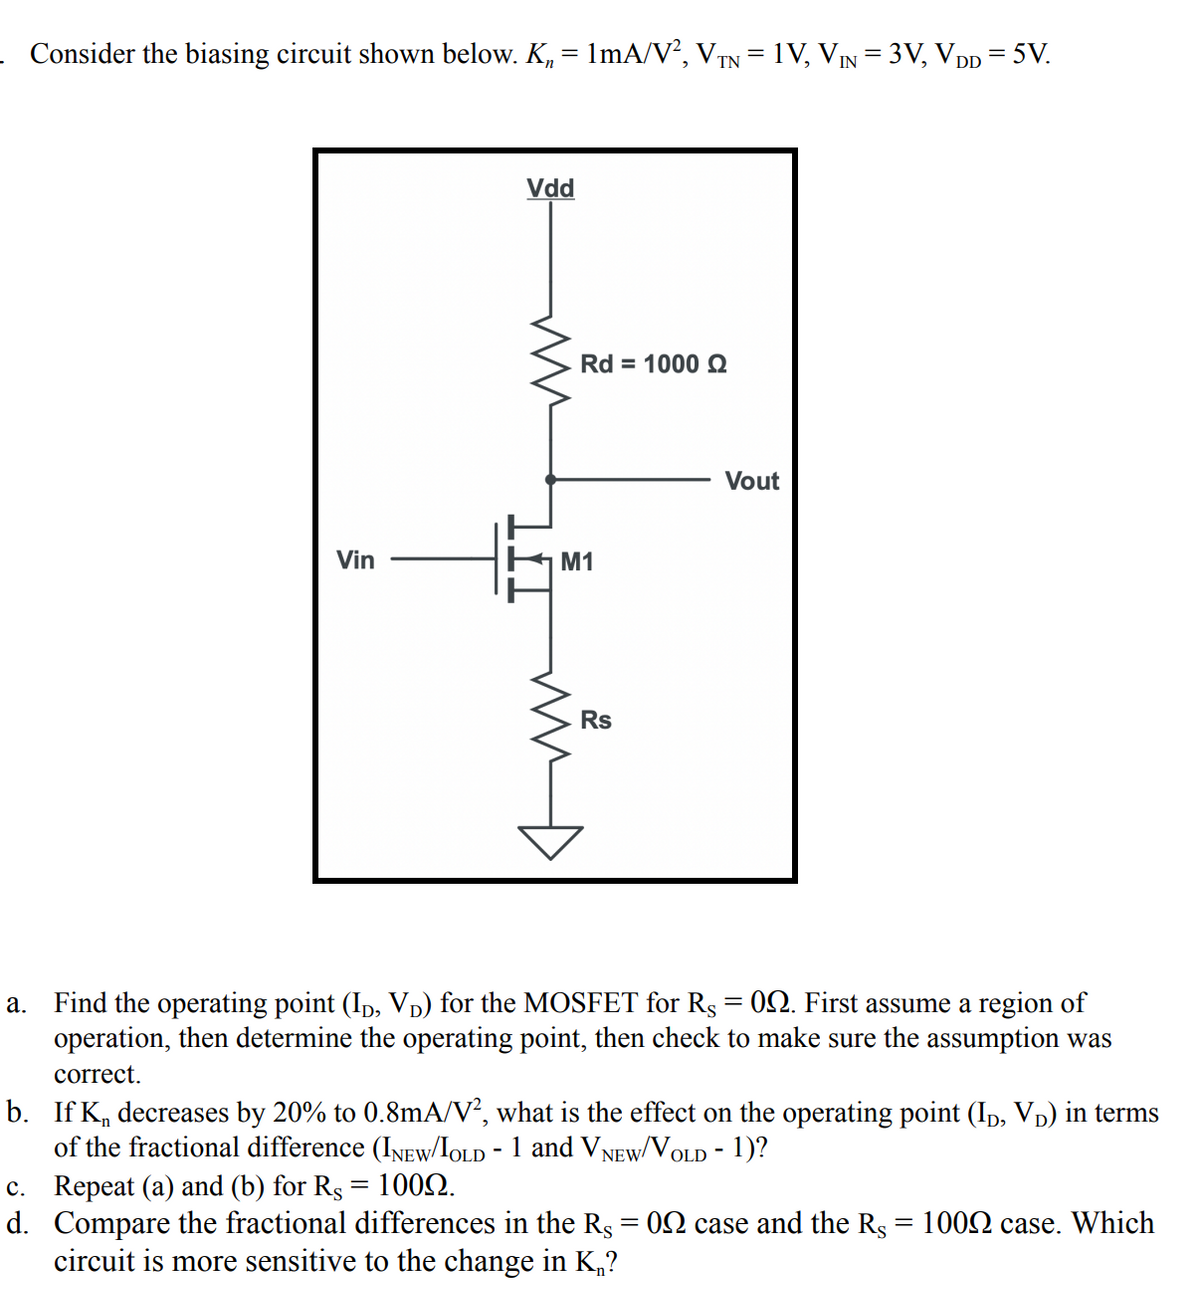 Consider the biasing circuit shown below. K, = 1mA/V?, VTN = 1V, VIN = 3V, VDp = 5V.
Vdd
Rd = 1000 Q
Vout
Vin
M1
Rs
a. Find the operating point (Ip, VD) for the MOSFET for Rs = 02. First assume a region of
operation, then determine the operating point, then check to make sure the assumption was
correct.
b. If K, decreases by 20% to 0.8mA/V², what is the effect on the operating point (Ip, Vp) in terms
of the fractional difference (INEW/IOLD - 1 and VNEW/VOLD - 1)?
c. Repeat (a) and (b) for Rs = 1002.
d. Compare the fractional differences in the Rs = 02 case and the Rs = 1002 case. Which
circuit is more sensitive to the change in K„?
